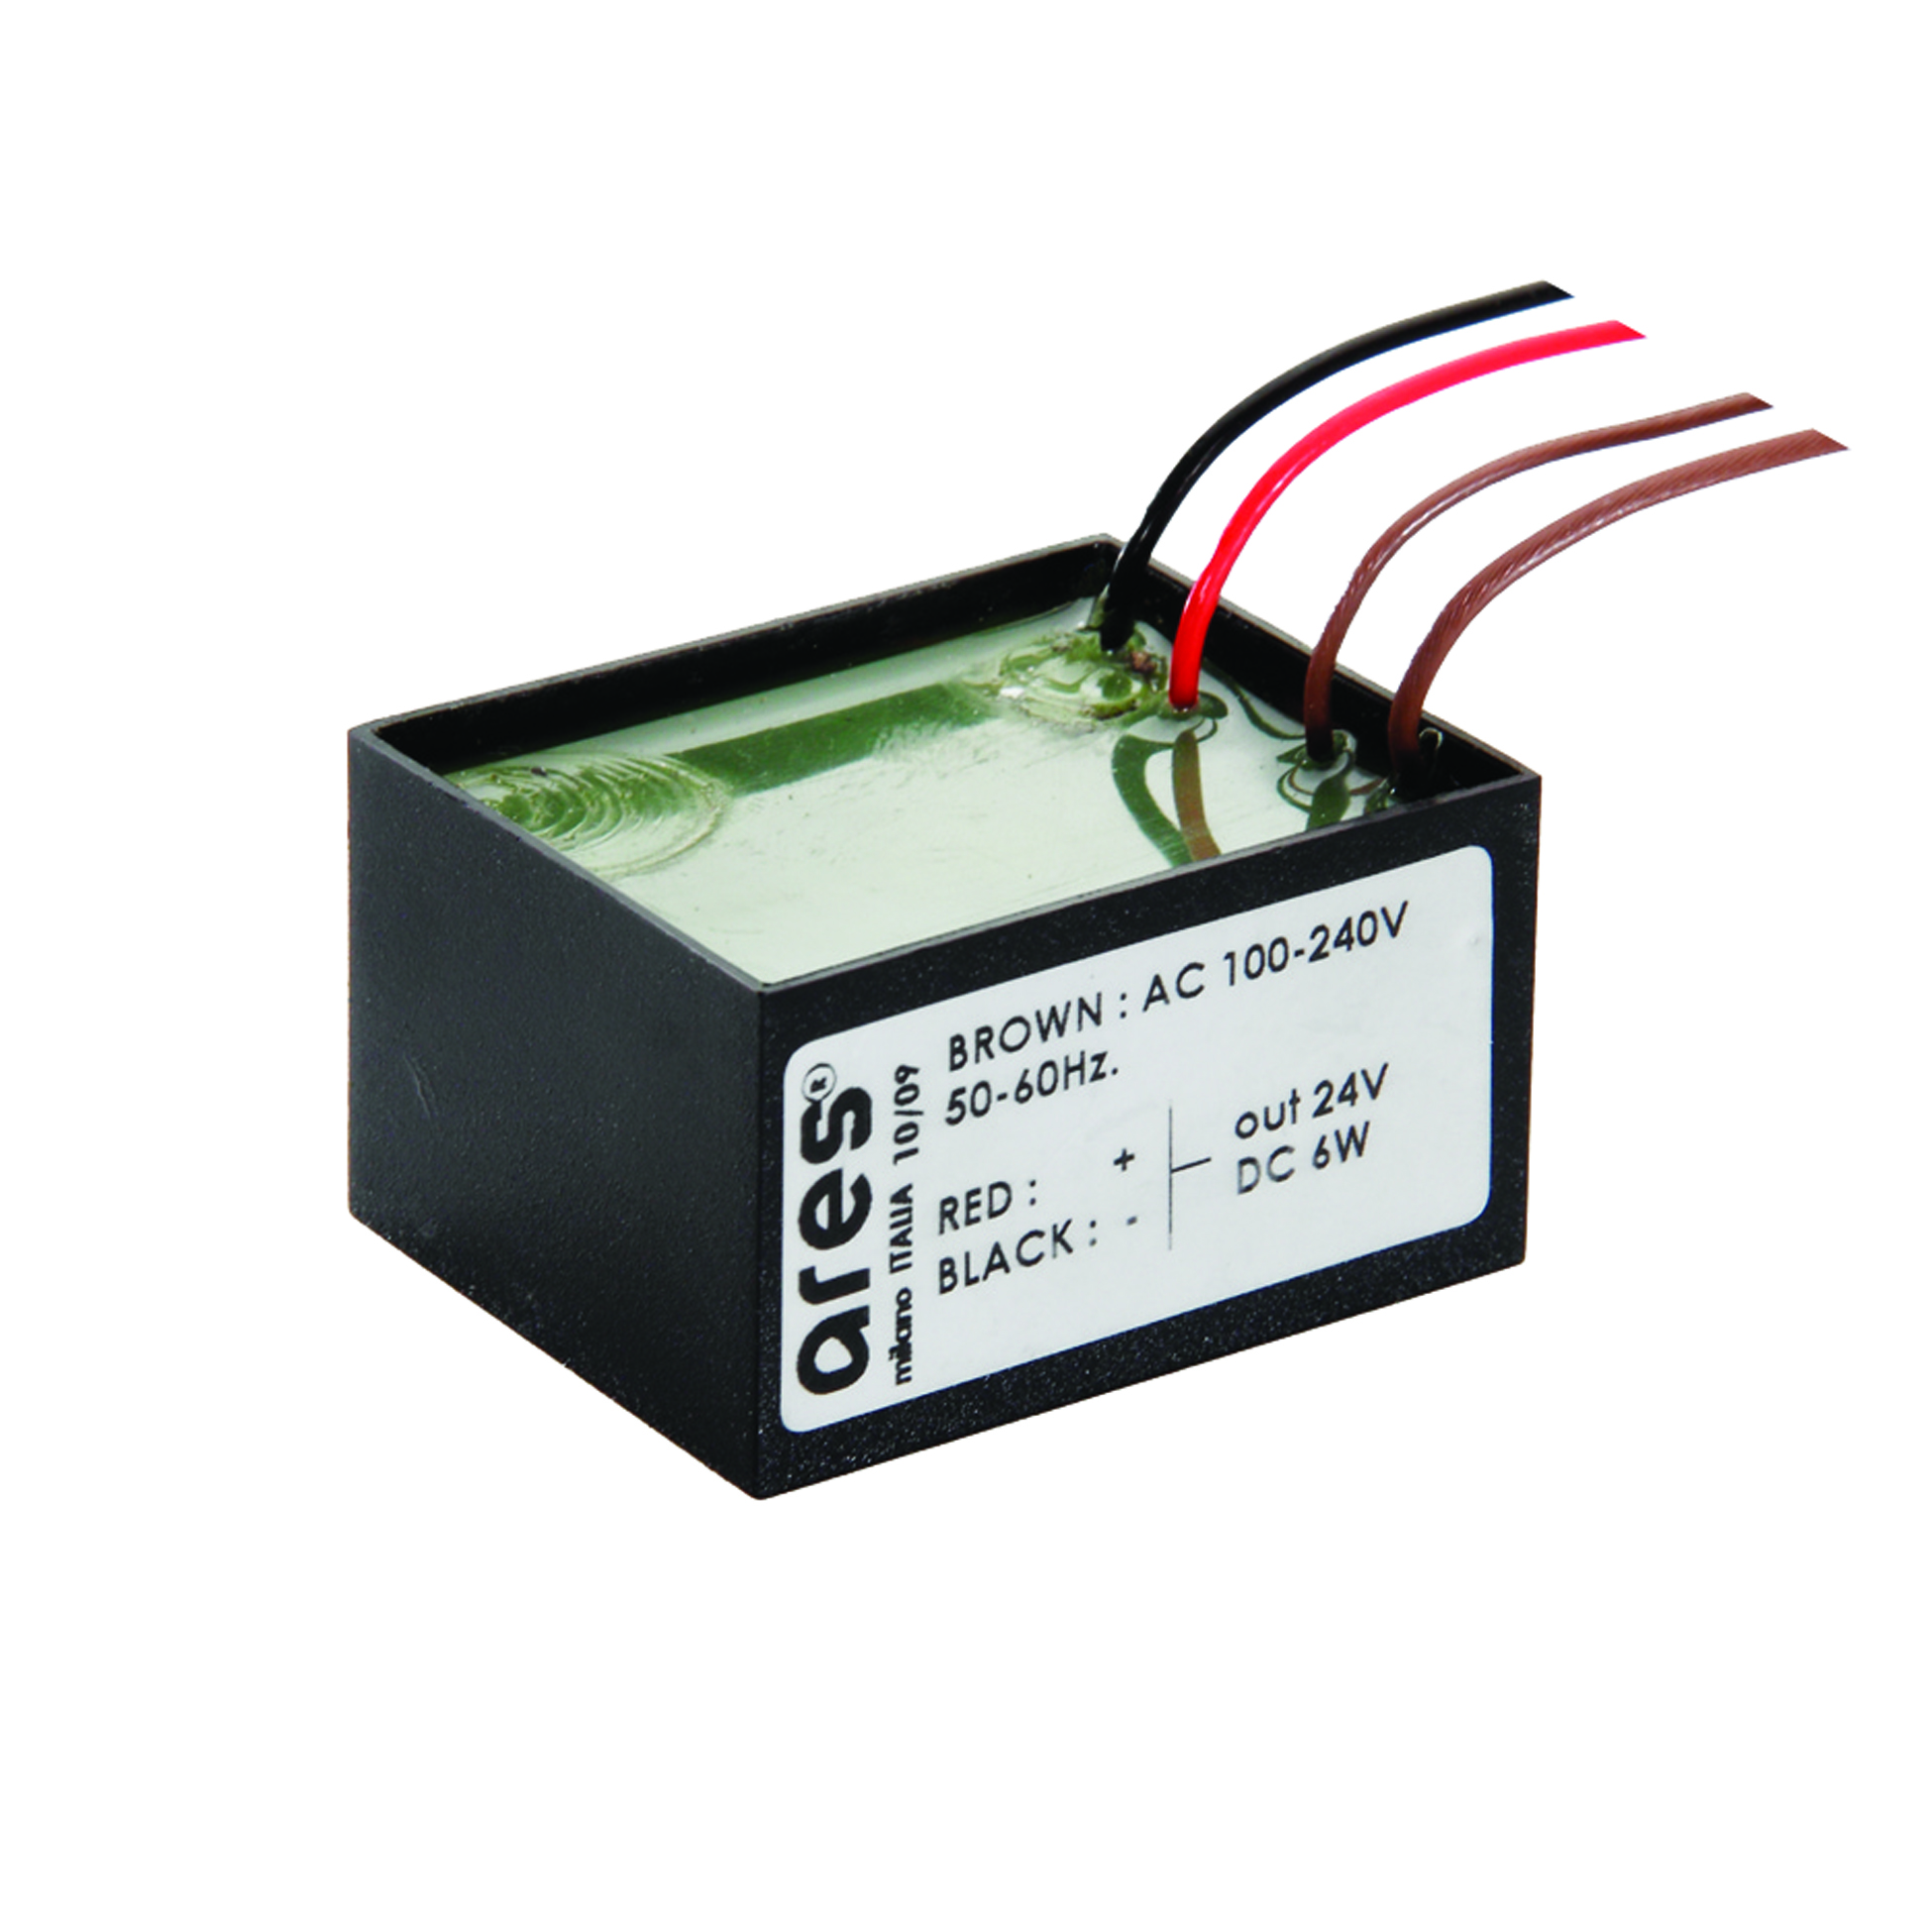 Power supply dual function Vout 24Vdc: 8W/100÷240V 6x1W/100÷240V IP65 Non Dimmable